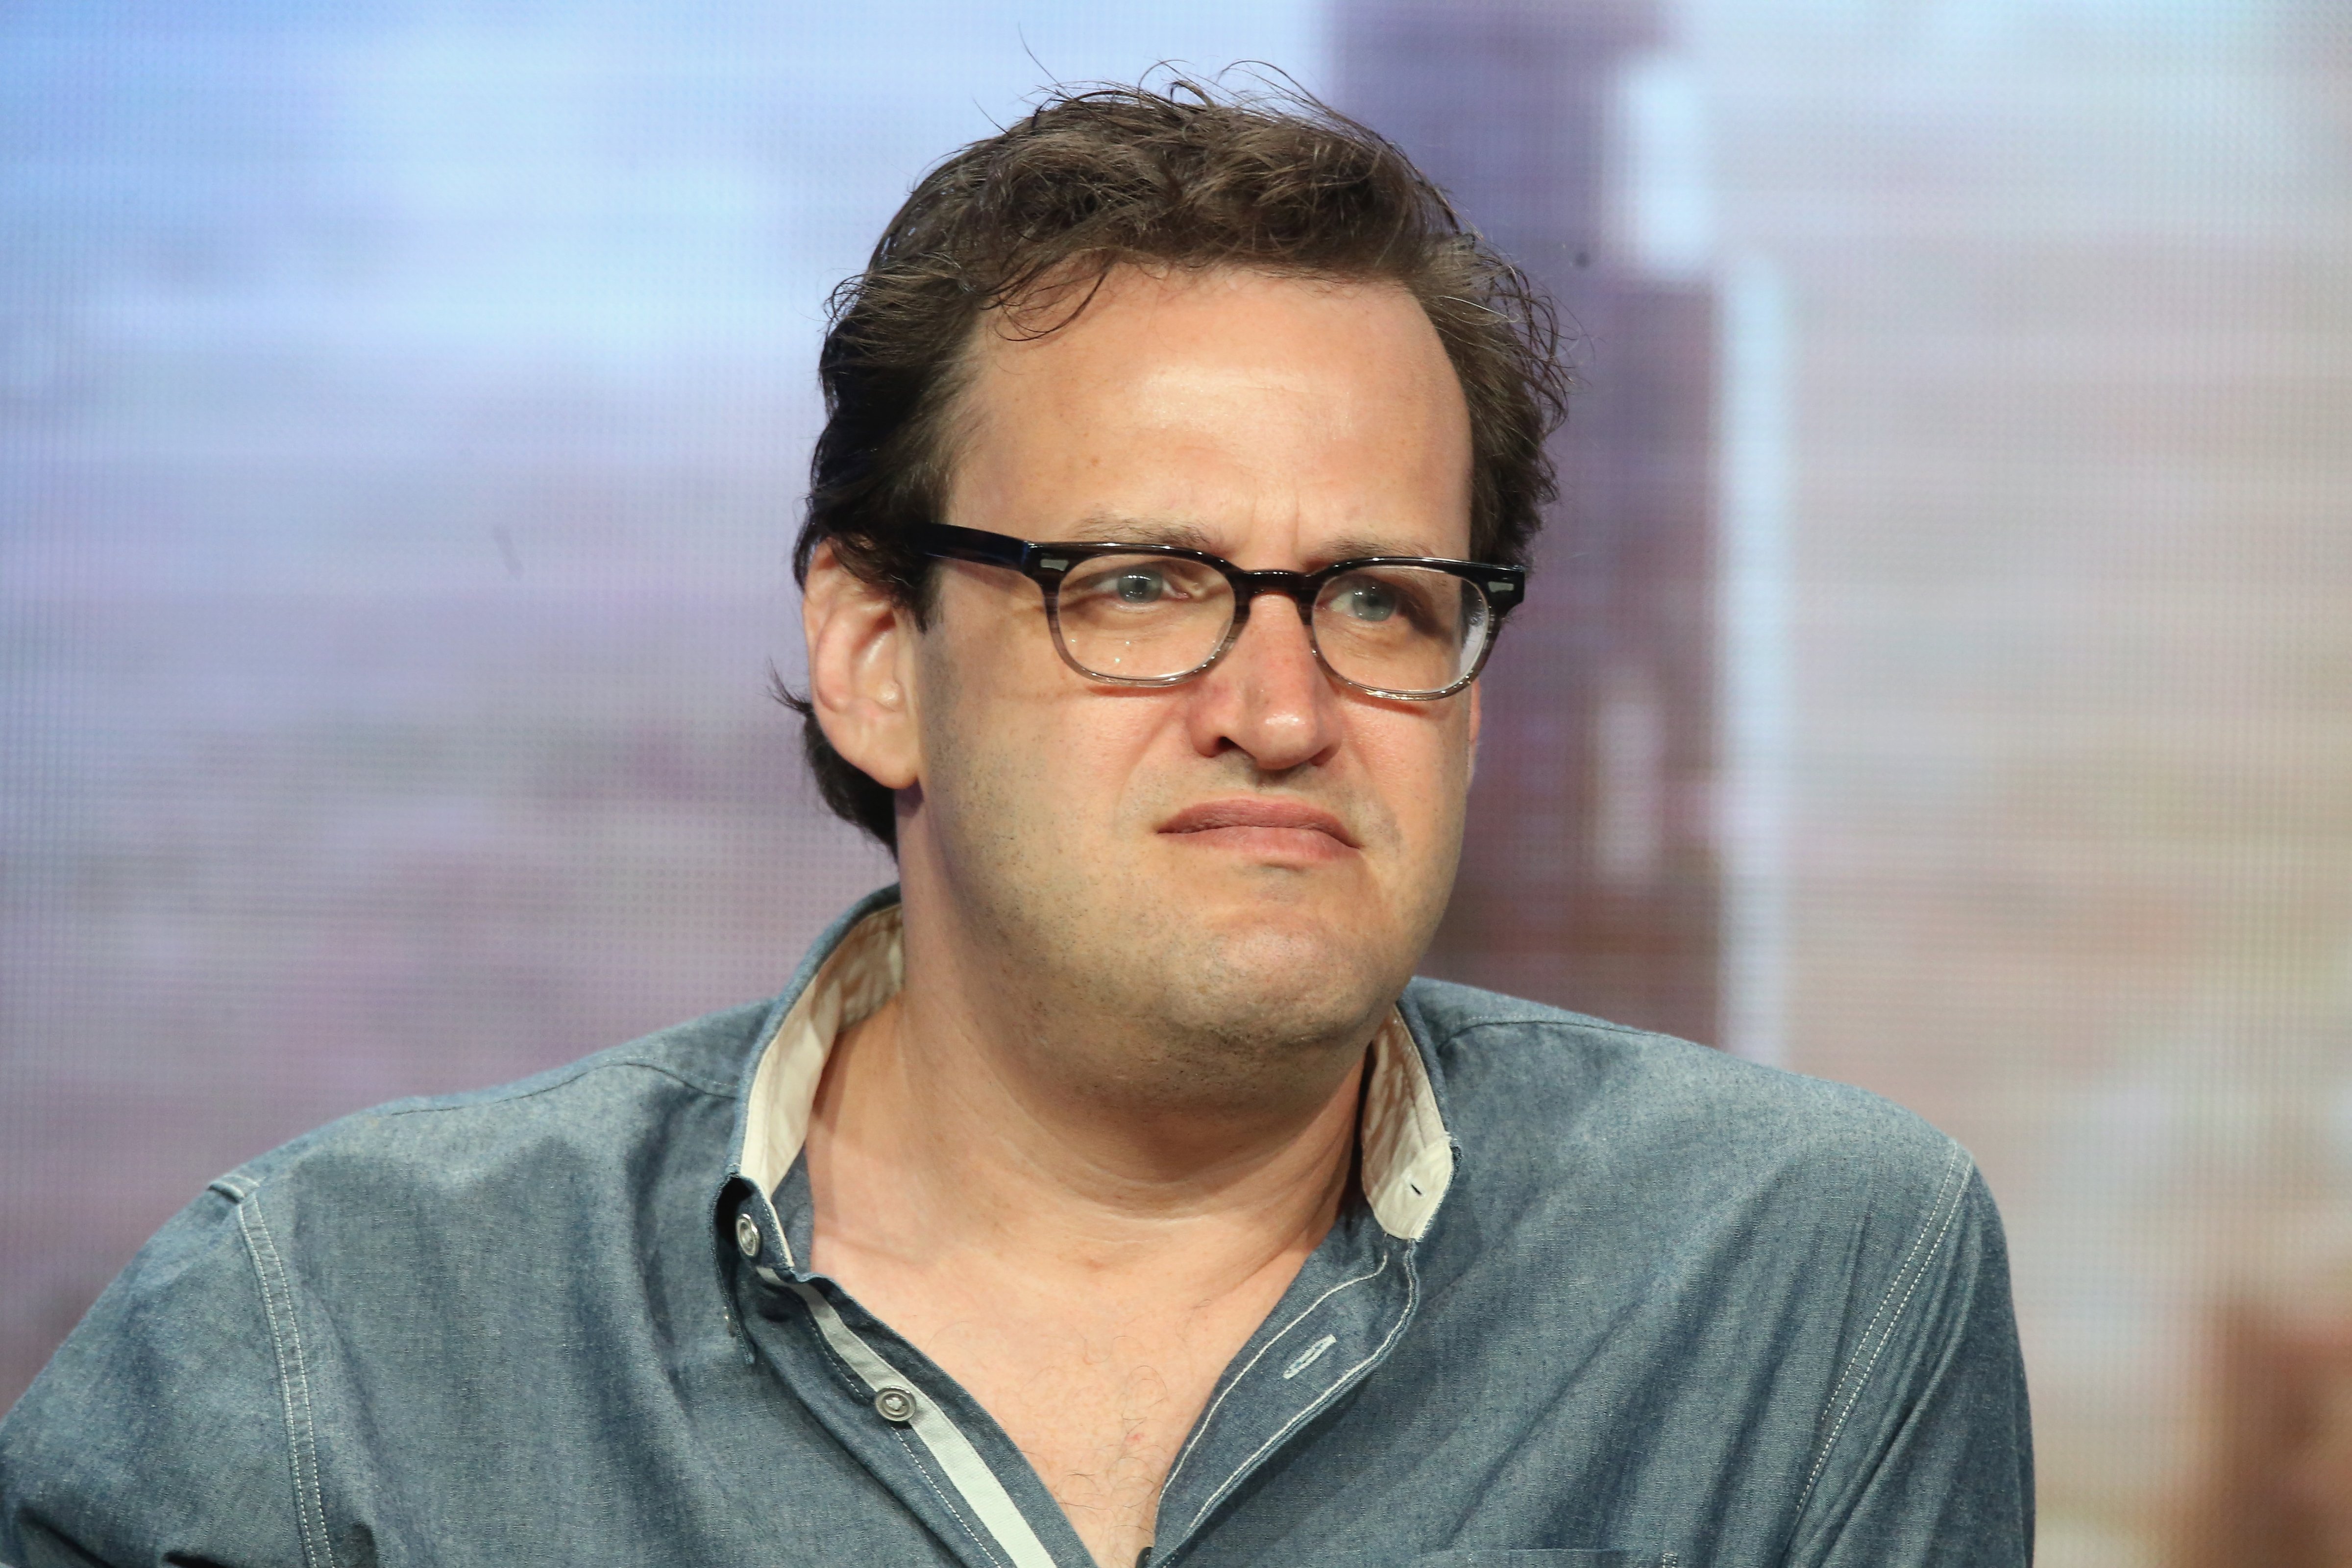 Producer Andrew Kreisberg speaks onstage during The Executive Producers' panel discussion during The CW portion of the 2016 Television Critics Association Summer Tour at The Beverly Hilton Hotel on Aug. 11, 2016. (Frederick M. Brown—Getty Images)